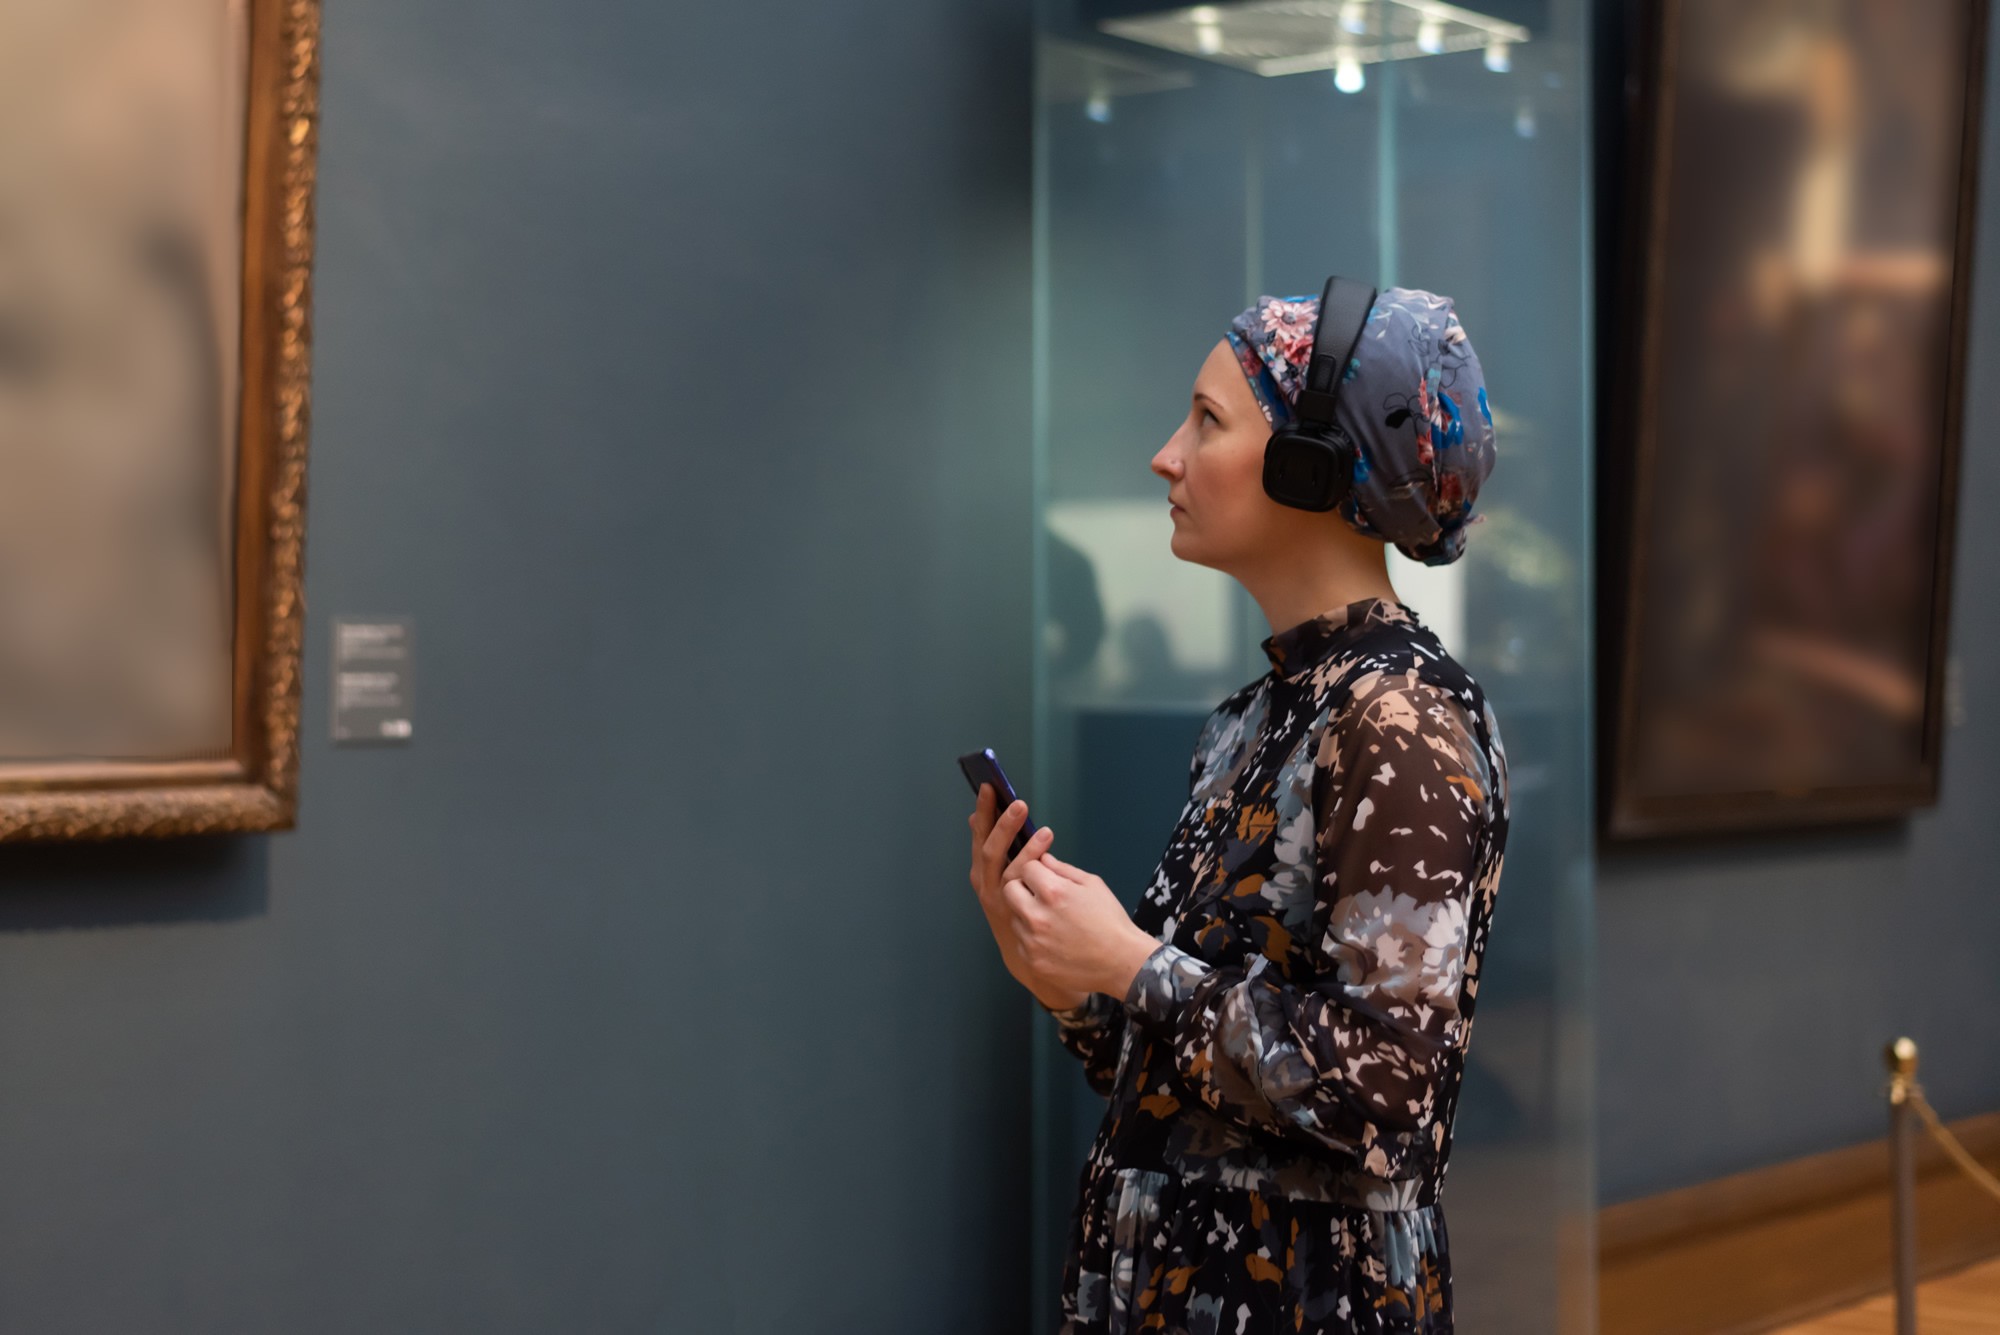 Inform visitors digitally within your museum